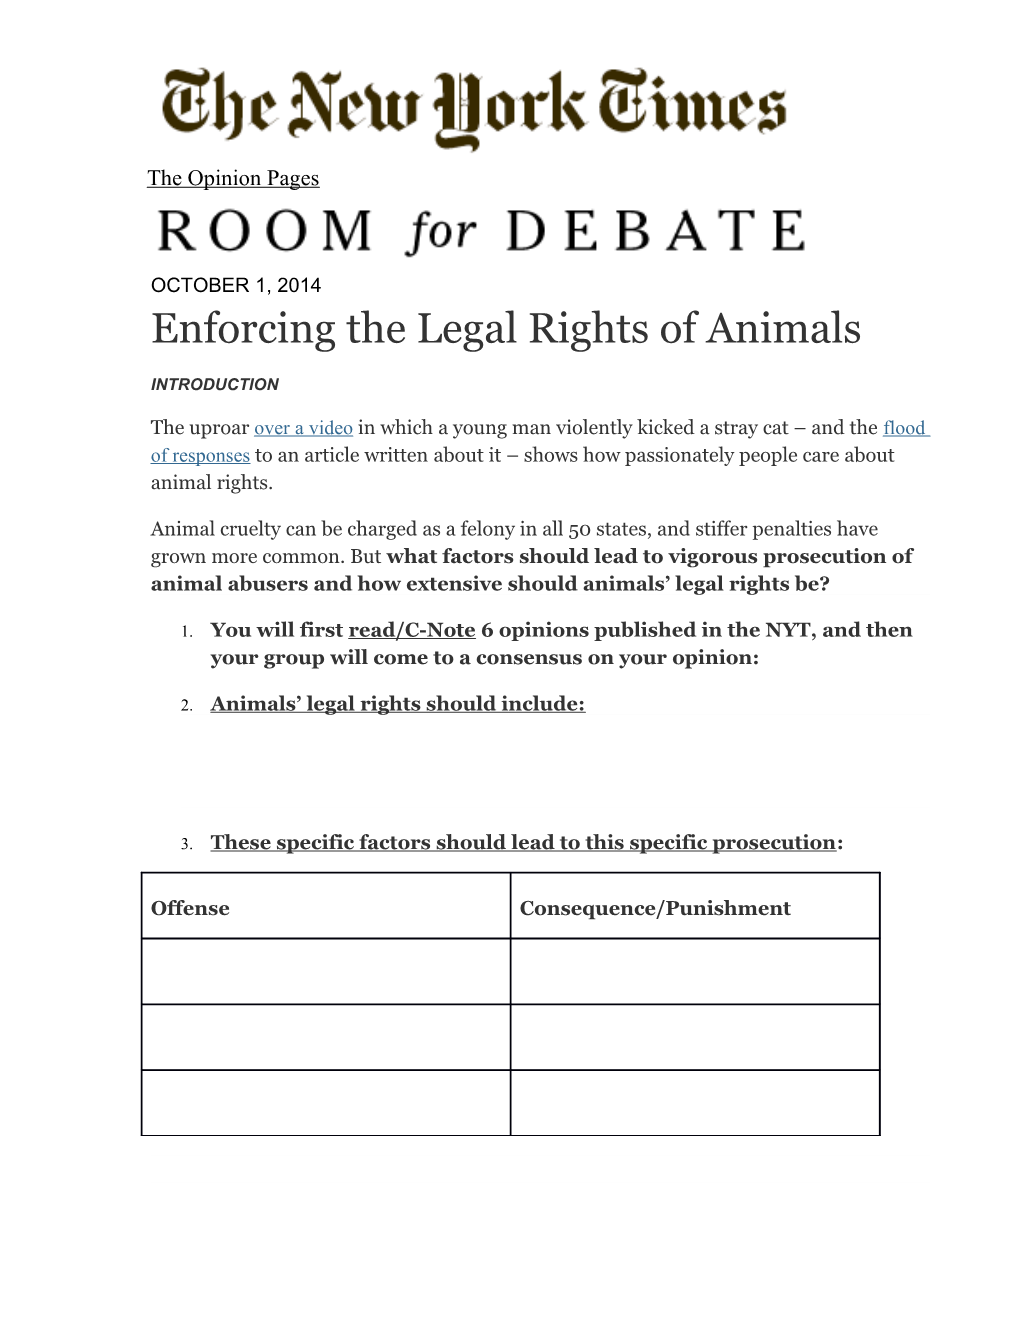 Enforcing the Legal Rights of Animals